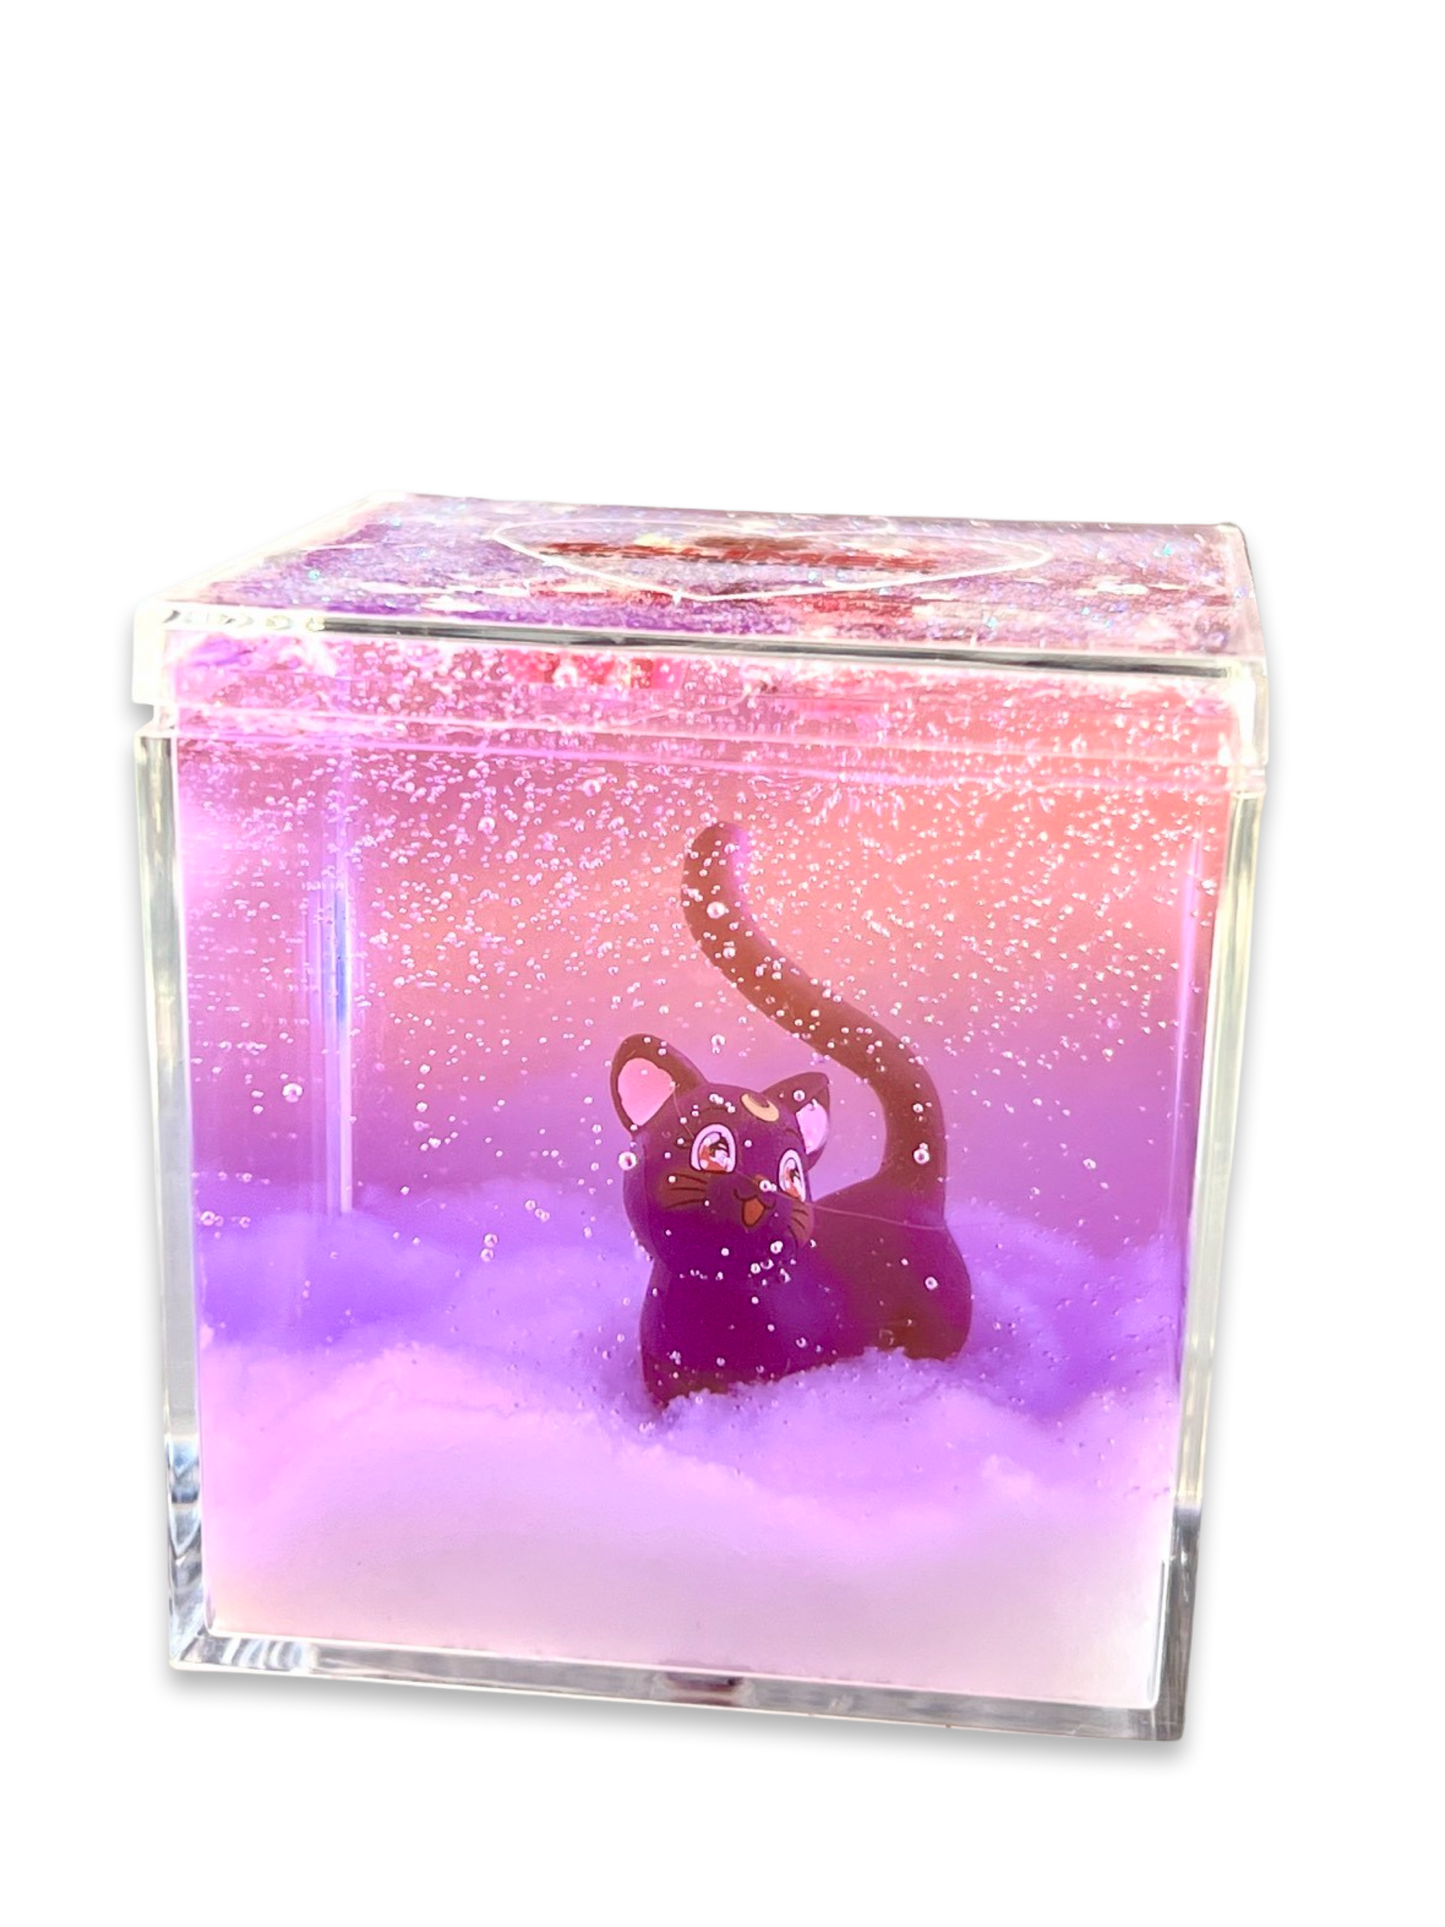 Iridescent Neon Luna In Snow In Holographic Cube!